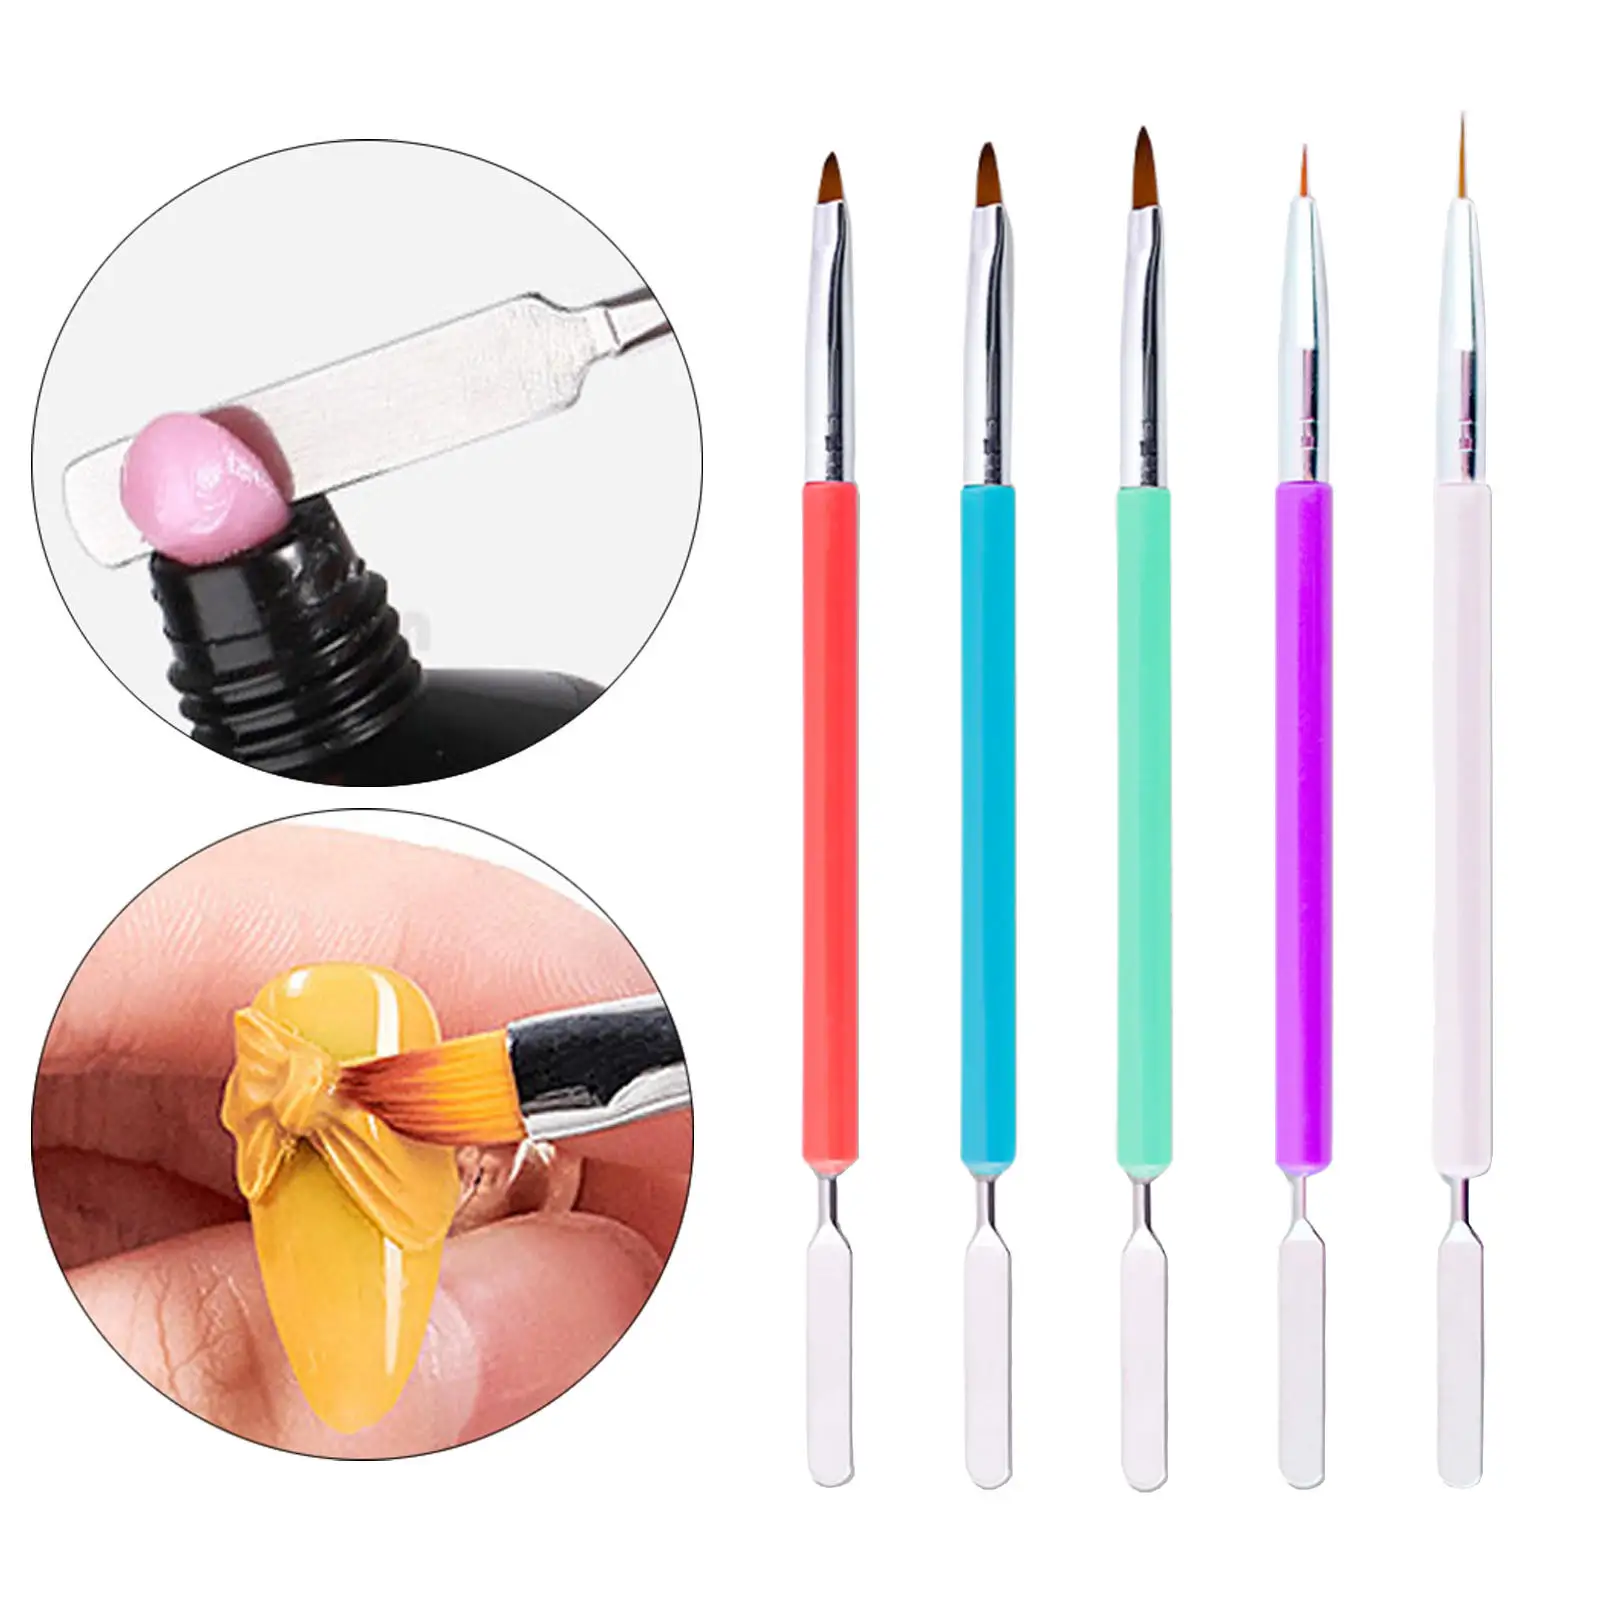 5x Nail Art Brush UV Gel Dual Head Spatula Stick Extension Drawing Pen for Salon Dotting Painting Home DIY Manicure Accessories